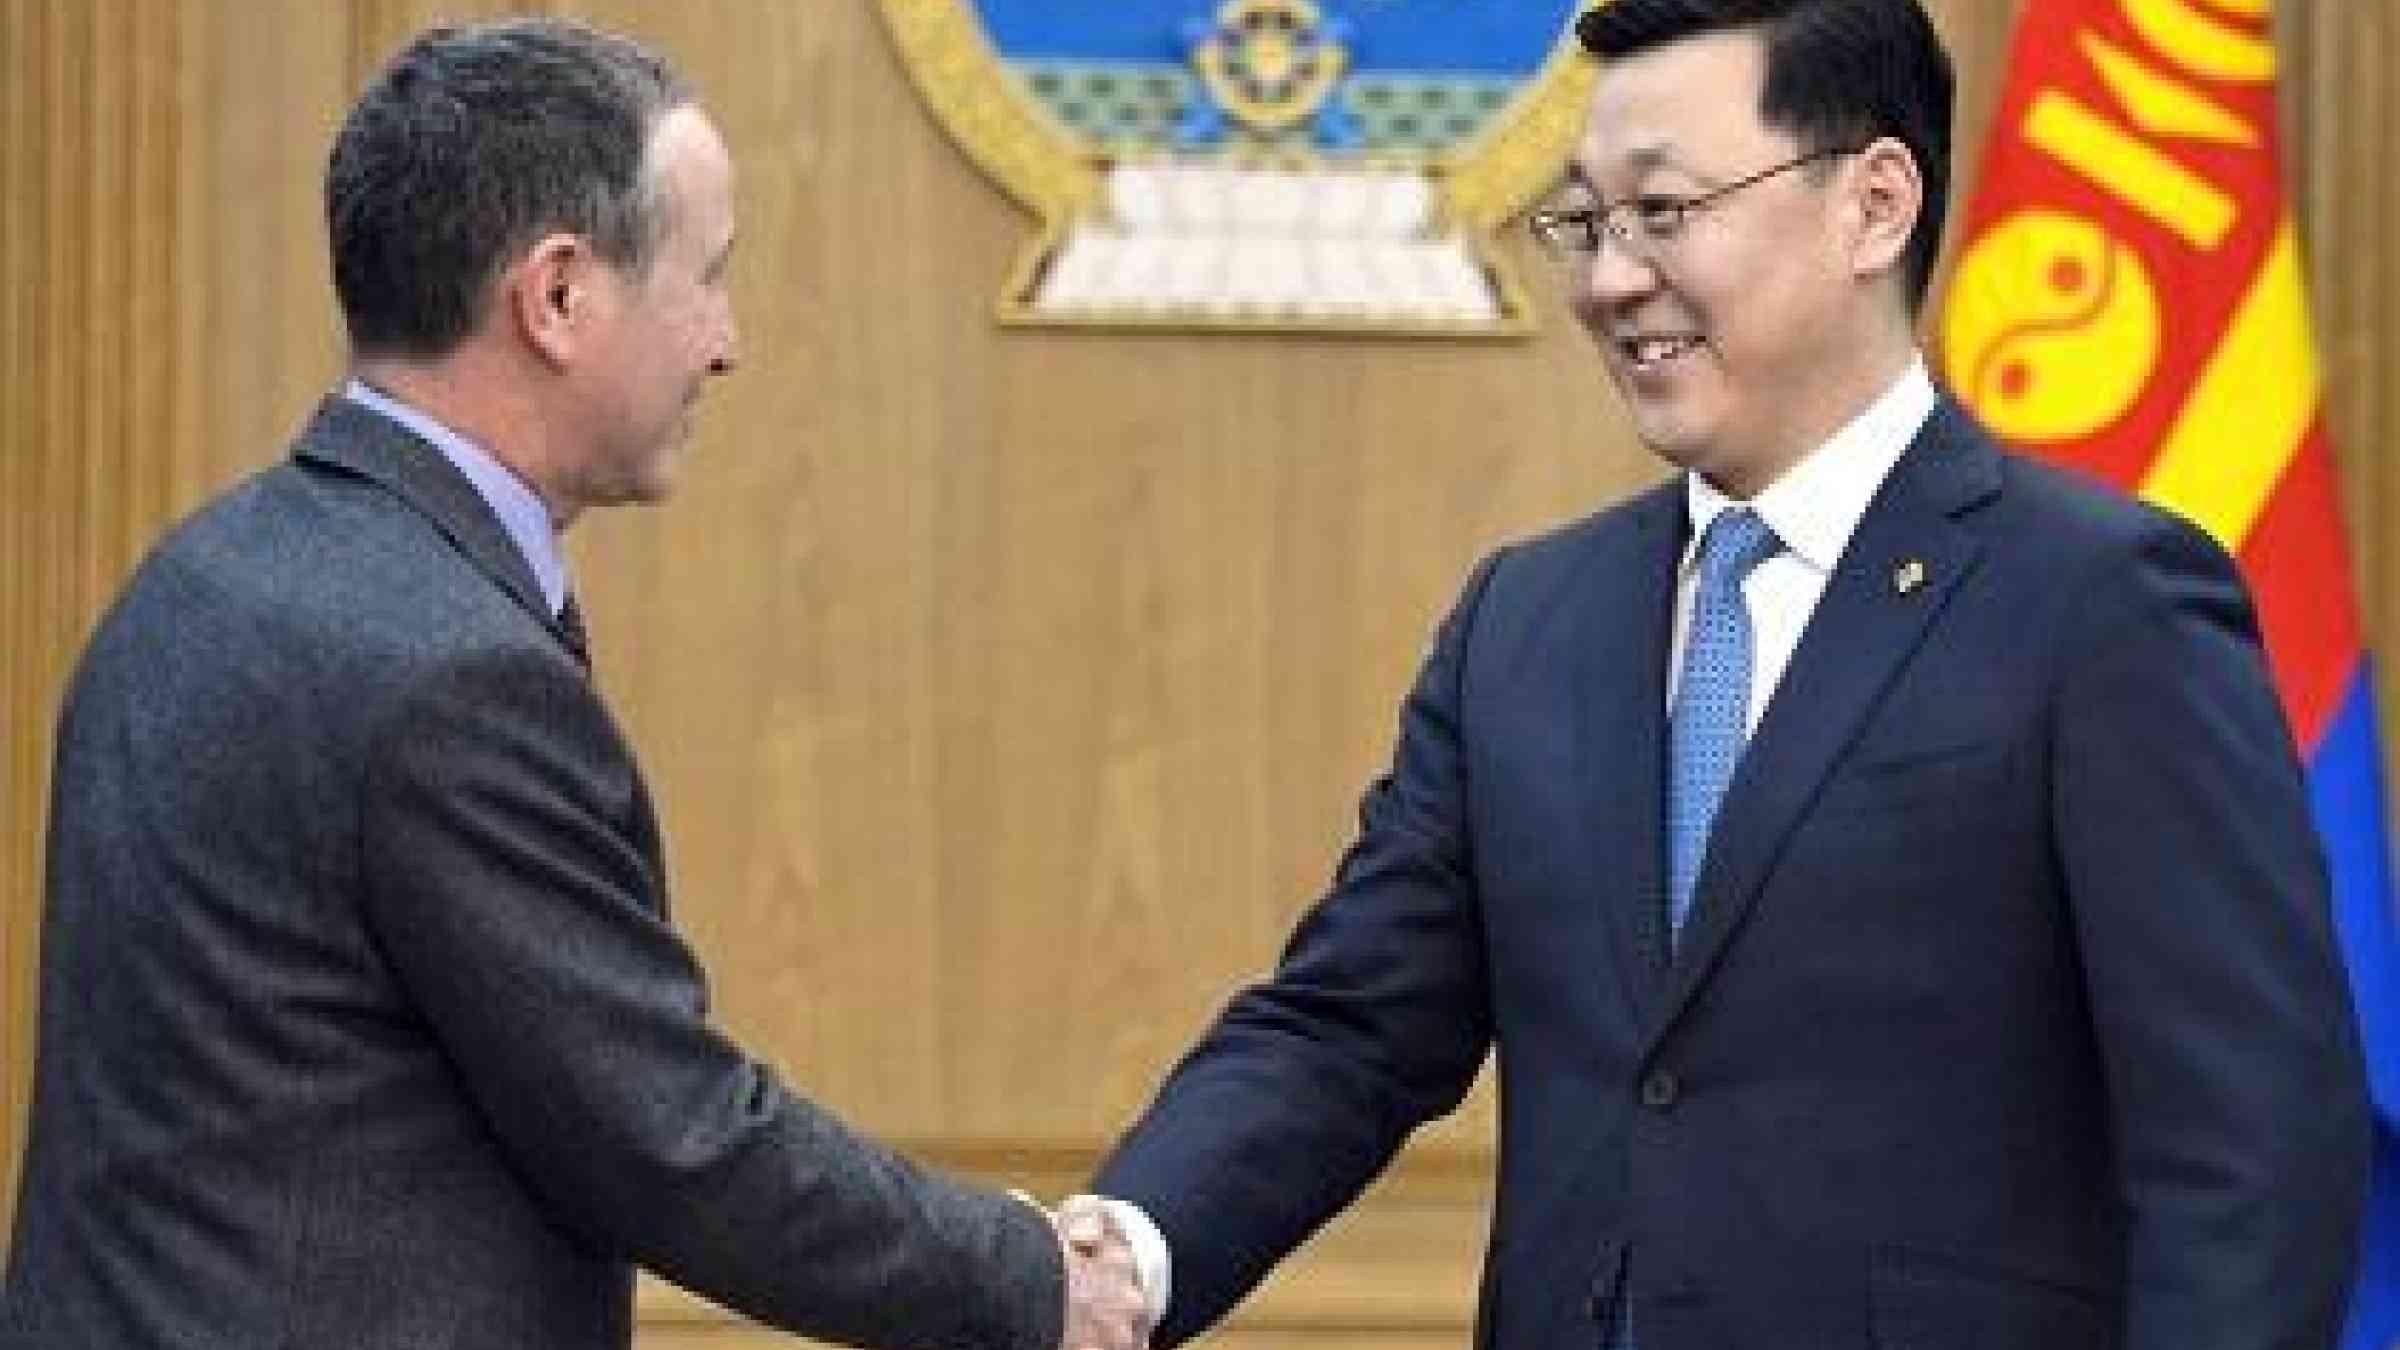 The Prime Minister of Mongolia, Mr. Jargaltulgyn Erdenebat (right) welcomes Mr. Robert Glasser, the Special Representative of the UN Secretary-General for Disaster Risk Reduction and Head of UNISDR, before their talks in Ulaanbaatar (Photo: Government of Mongolia)